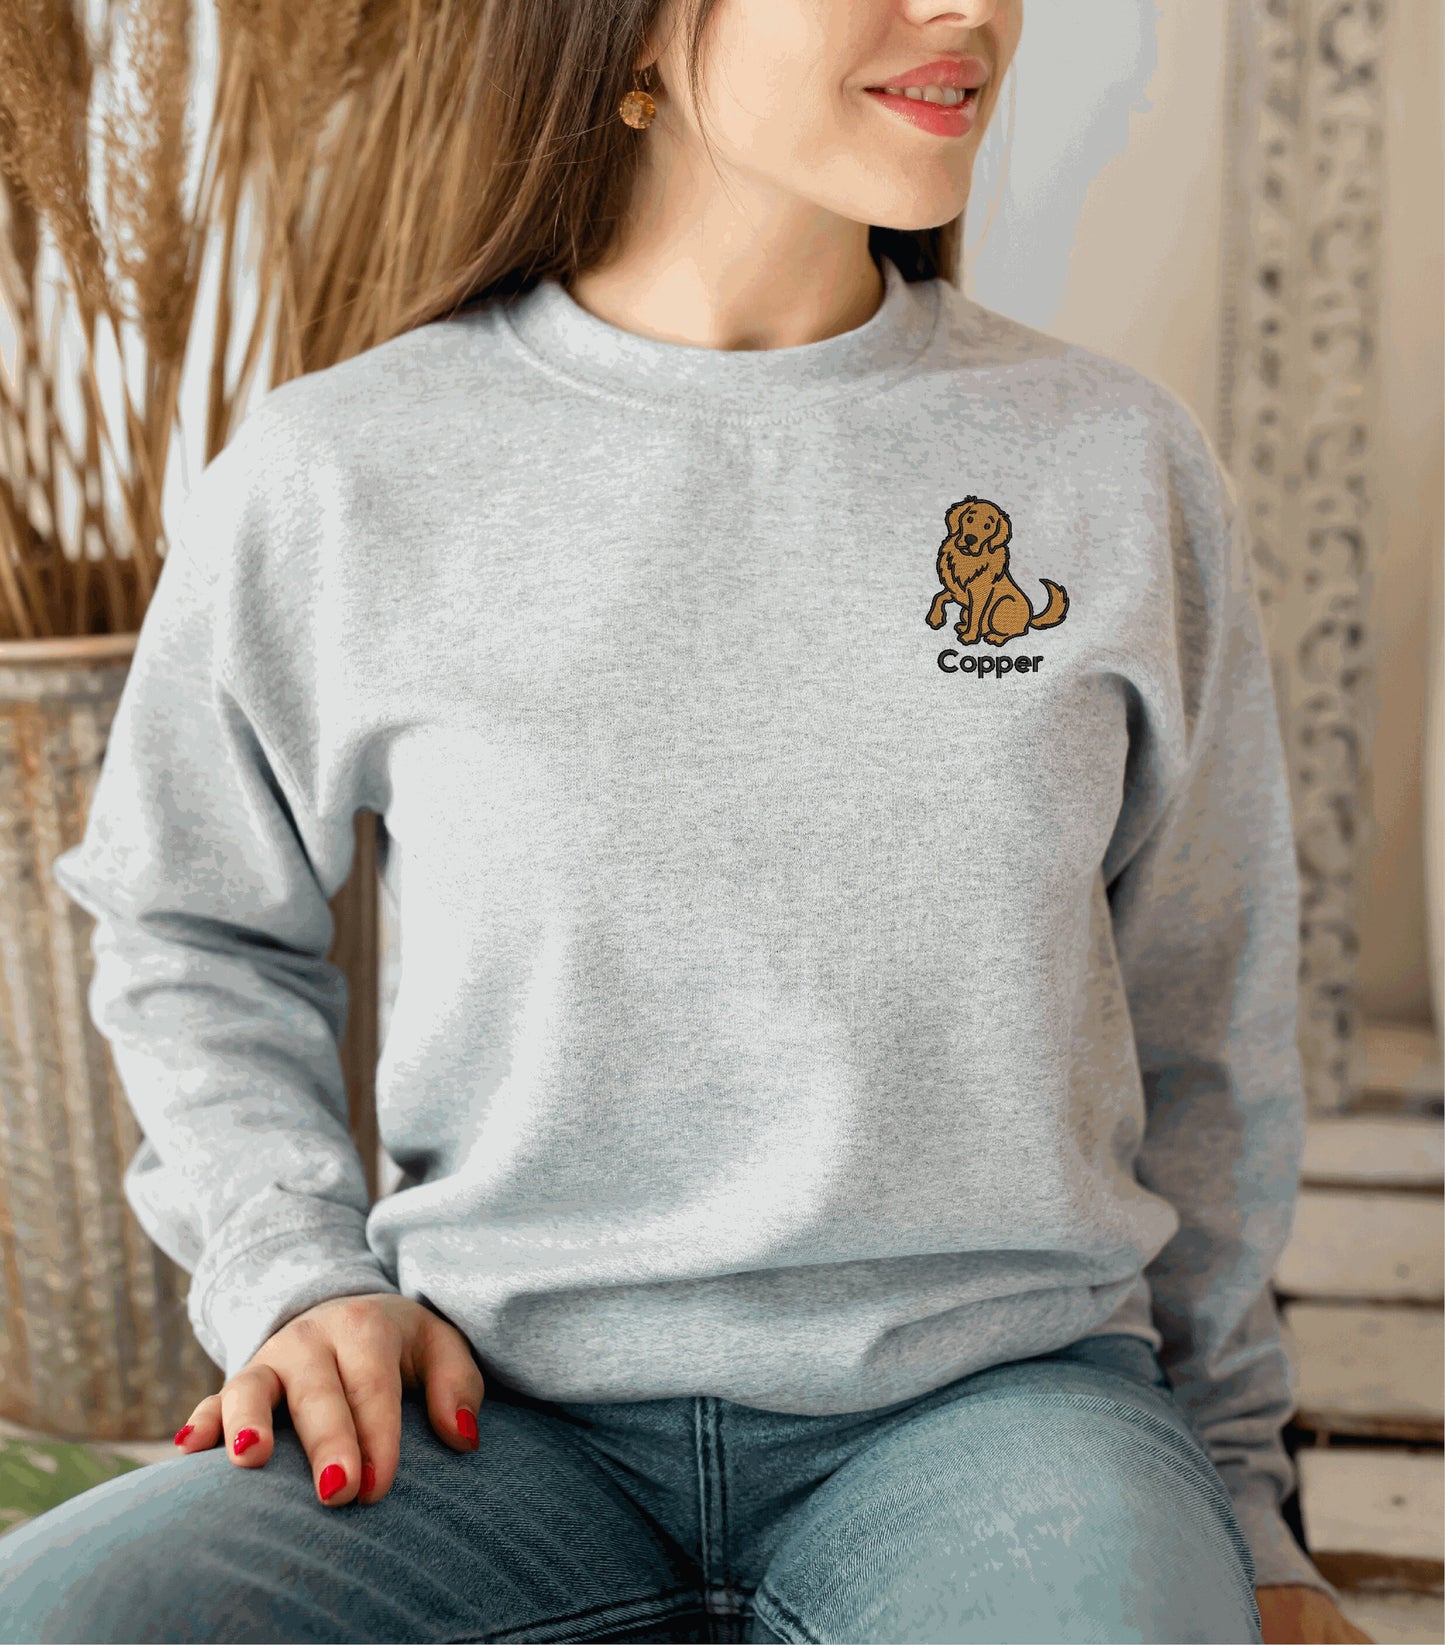 Golden Retriever Sweatshirt Personalized Custom Embroidered With Name